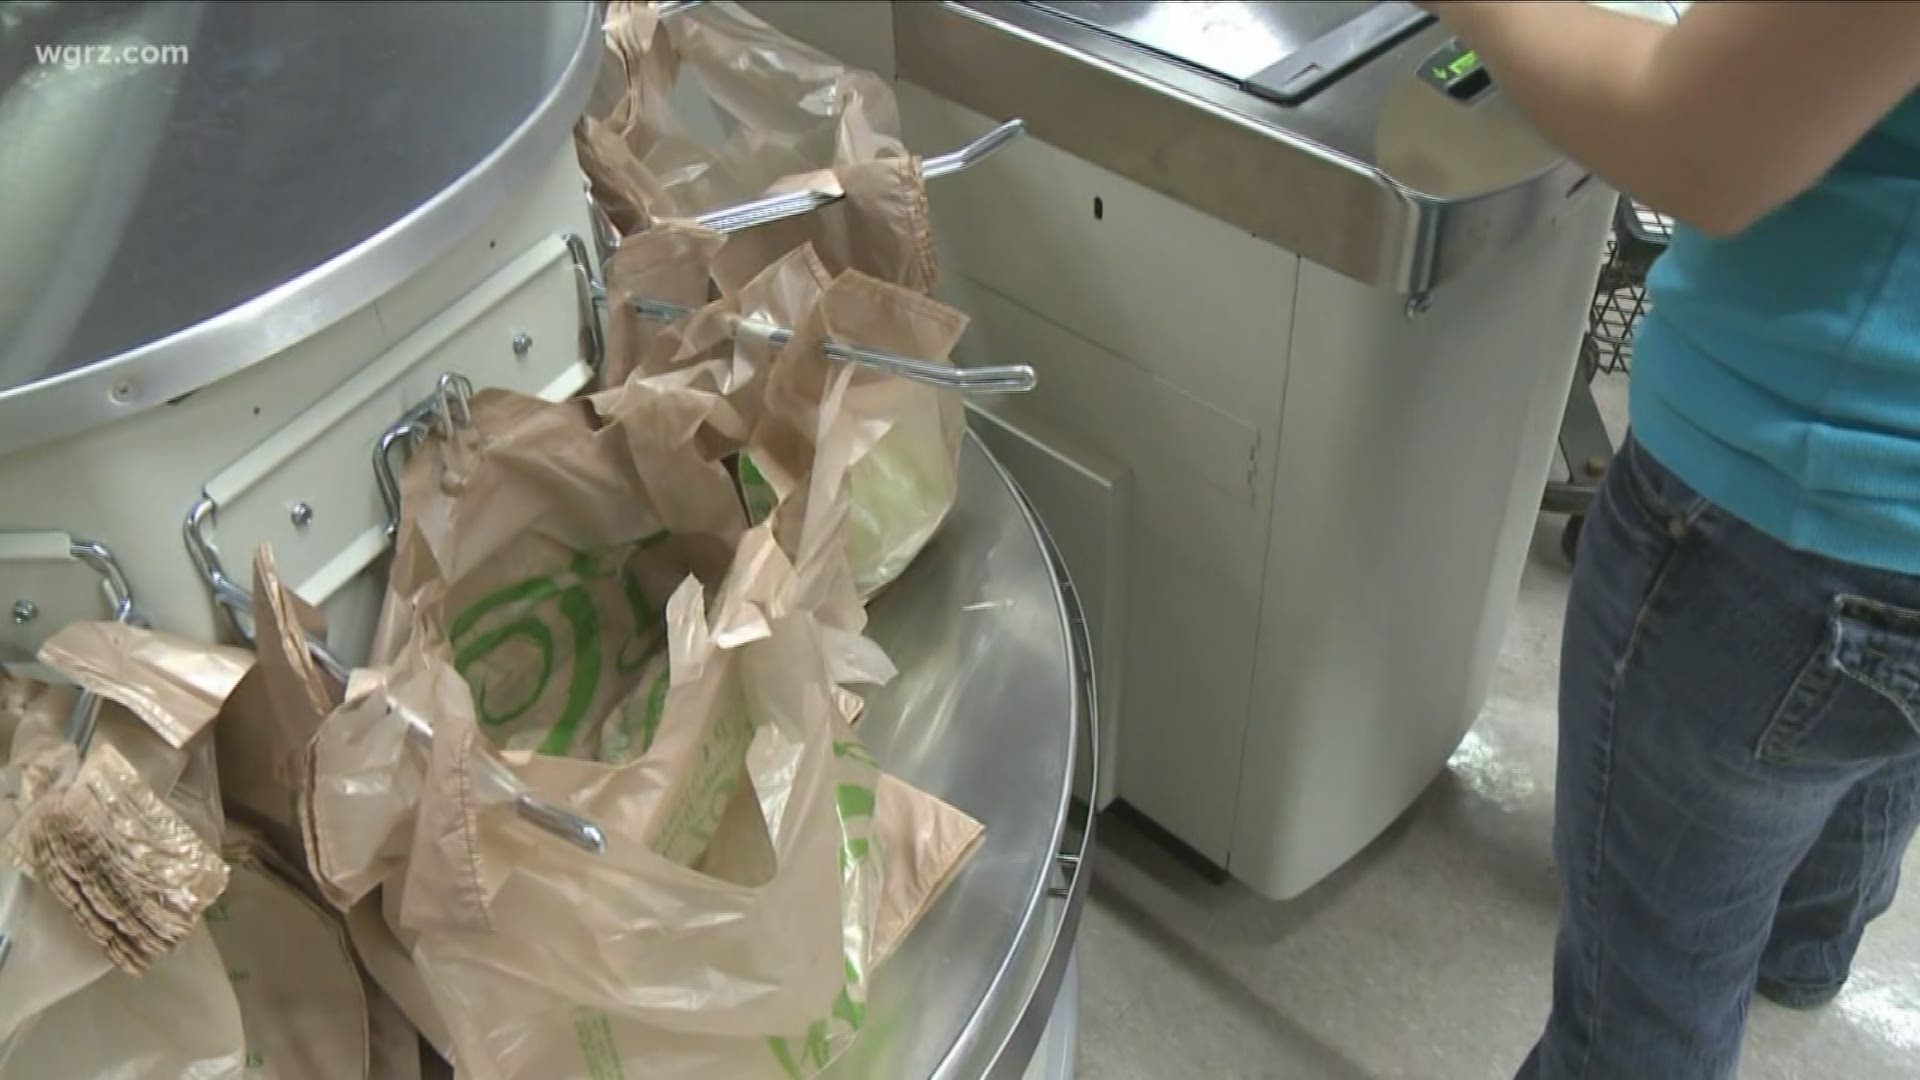 Single use bags are being dropped in favor of reusable or recyclable bags.